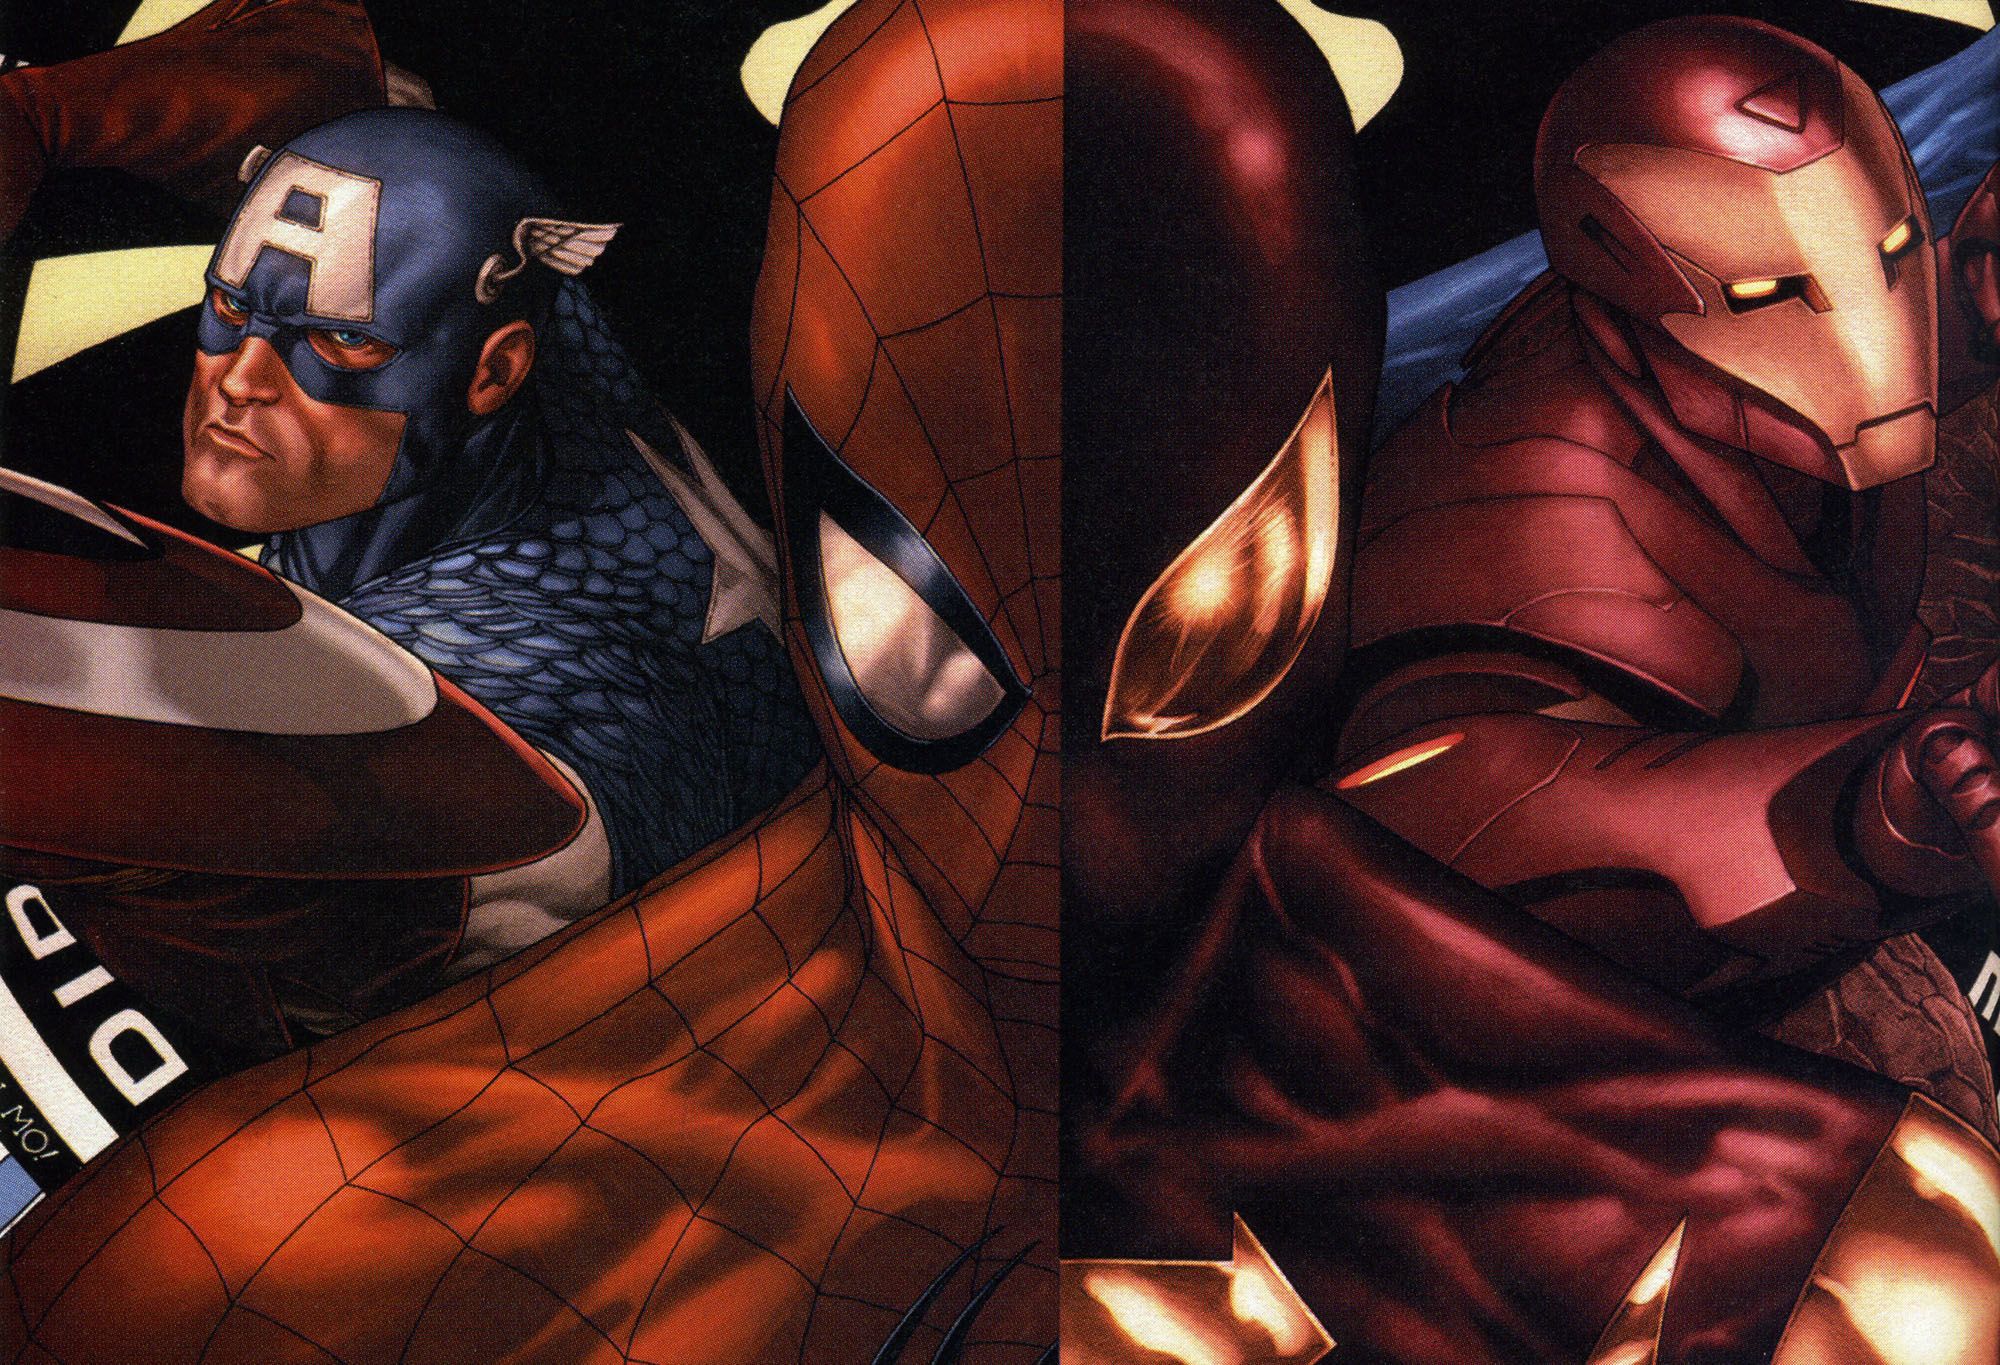 Where Spider Man Fits In The Marvel Cinematic Universe. Den Of Geek